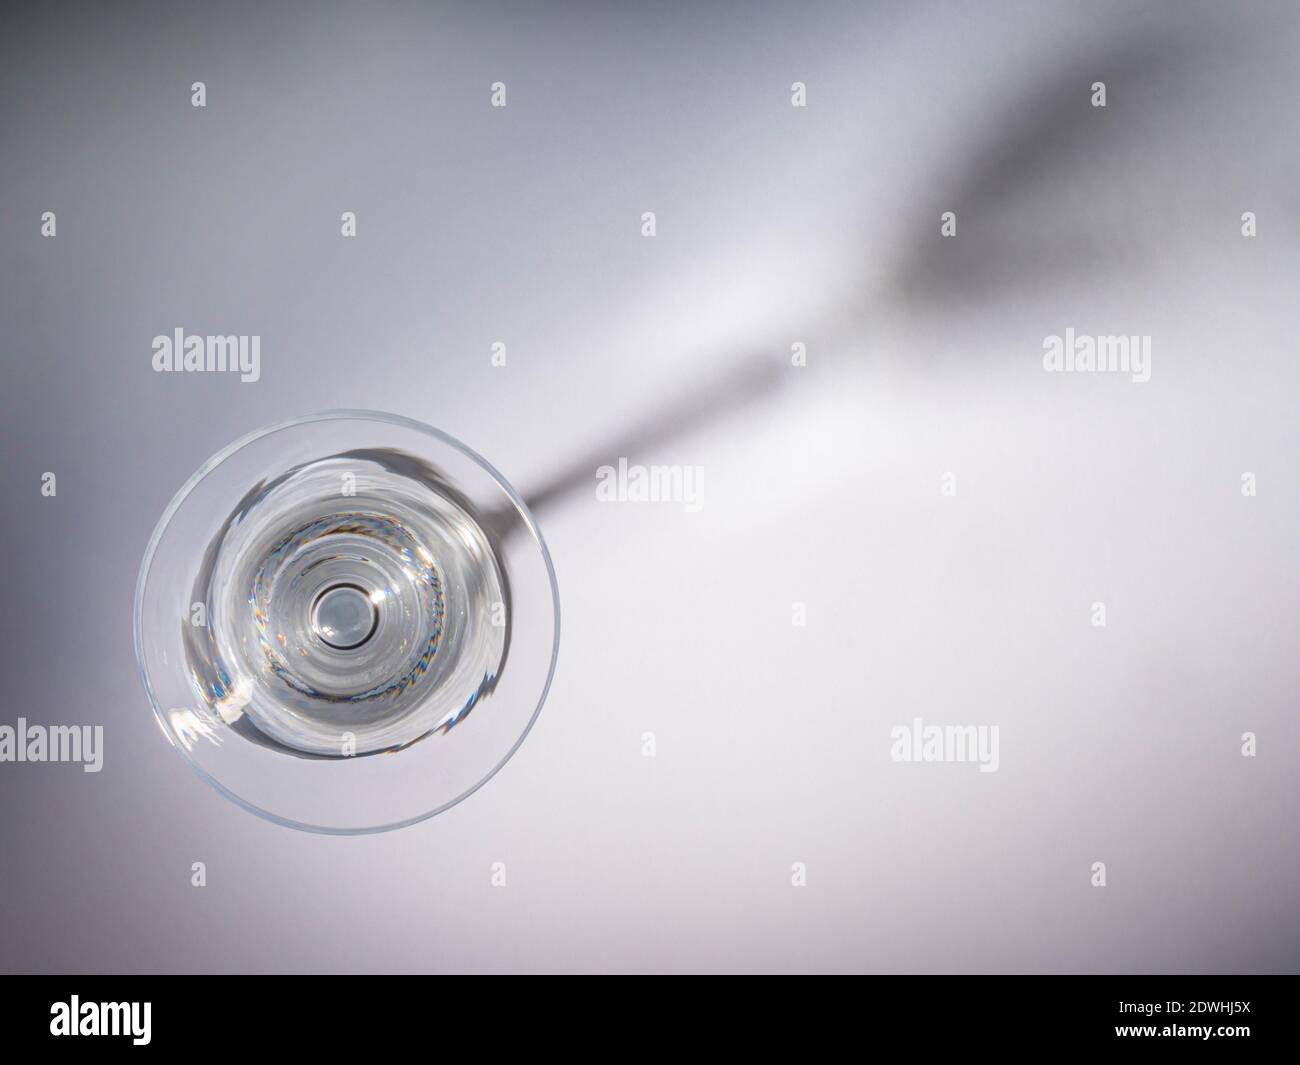 Empty cocktail glass seen from above with shadow of glass on background. Stock Photo